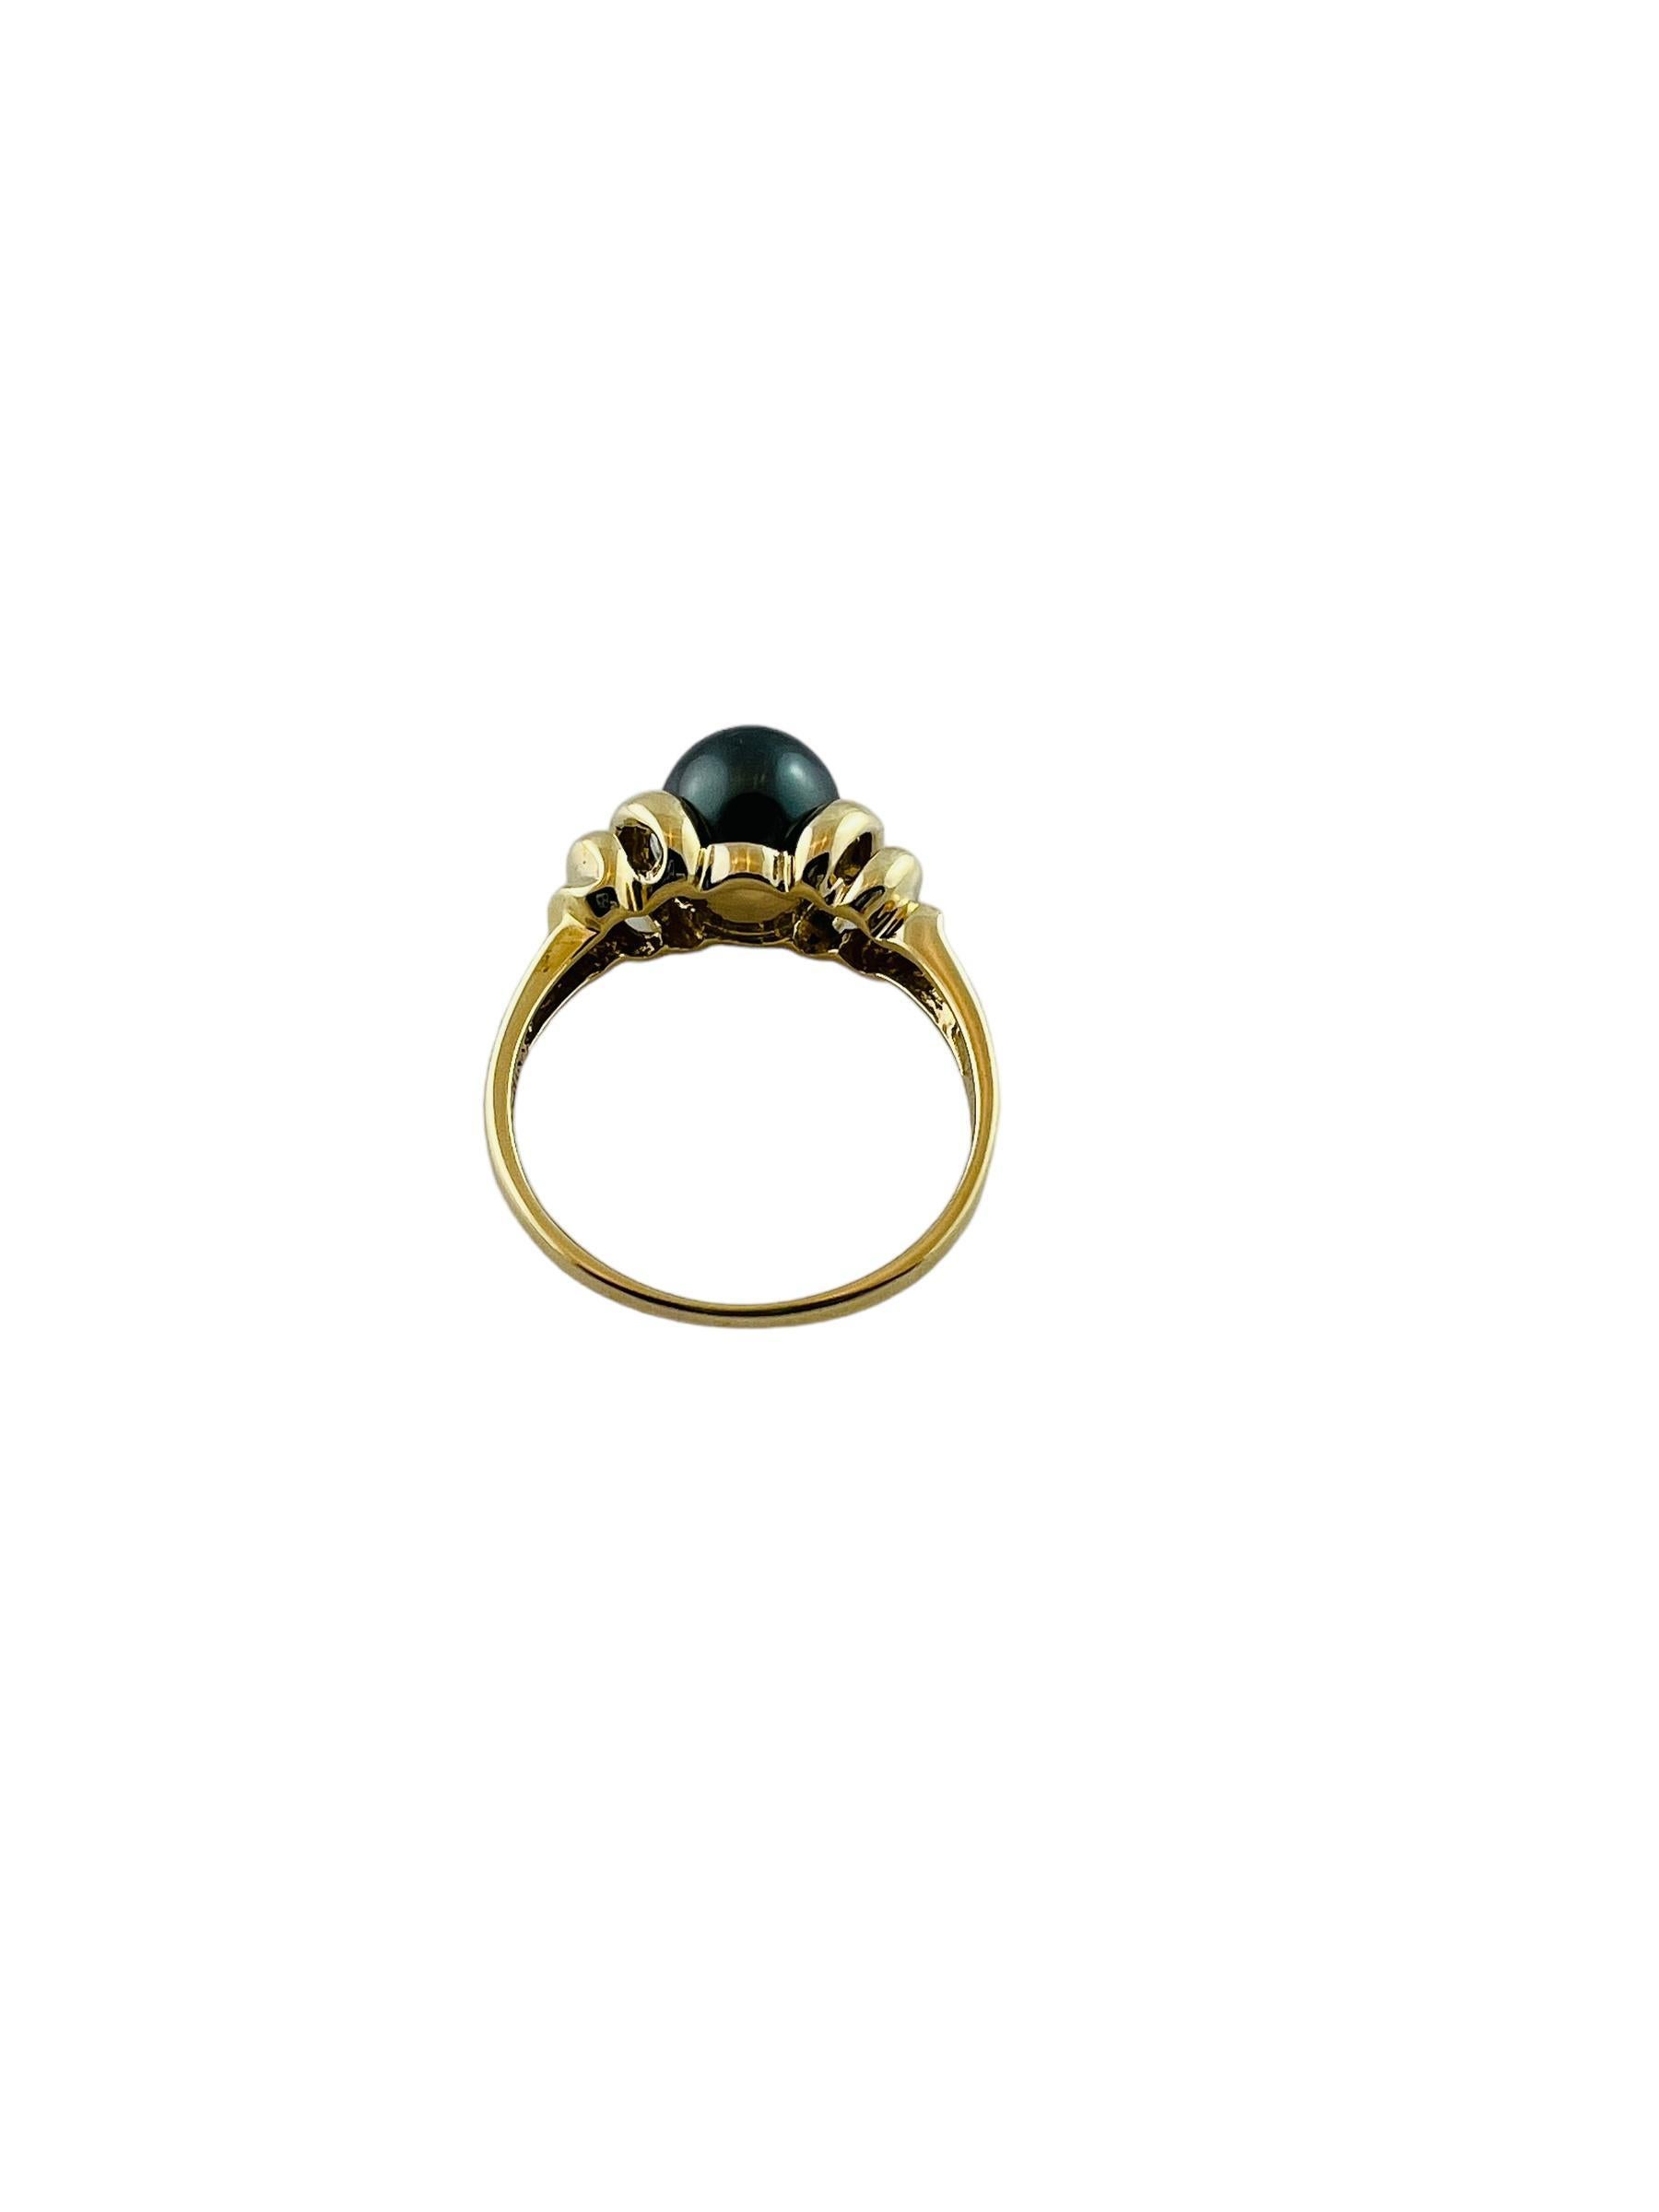 14K Yellow Gold Black Pear Ring

This beautiful ring is set in 14K yellow gold. 

The center stone is a black pearl approx. 8 mm.  

Size 7.25

1.4 mm shank

Front of ring is 16.1 x 8.1 x 9.5 mm

3.2 g / 2.0 dwt

Stamped 14K China

Very good